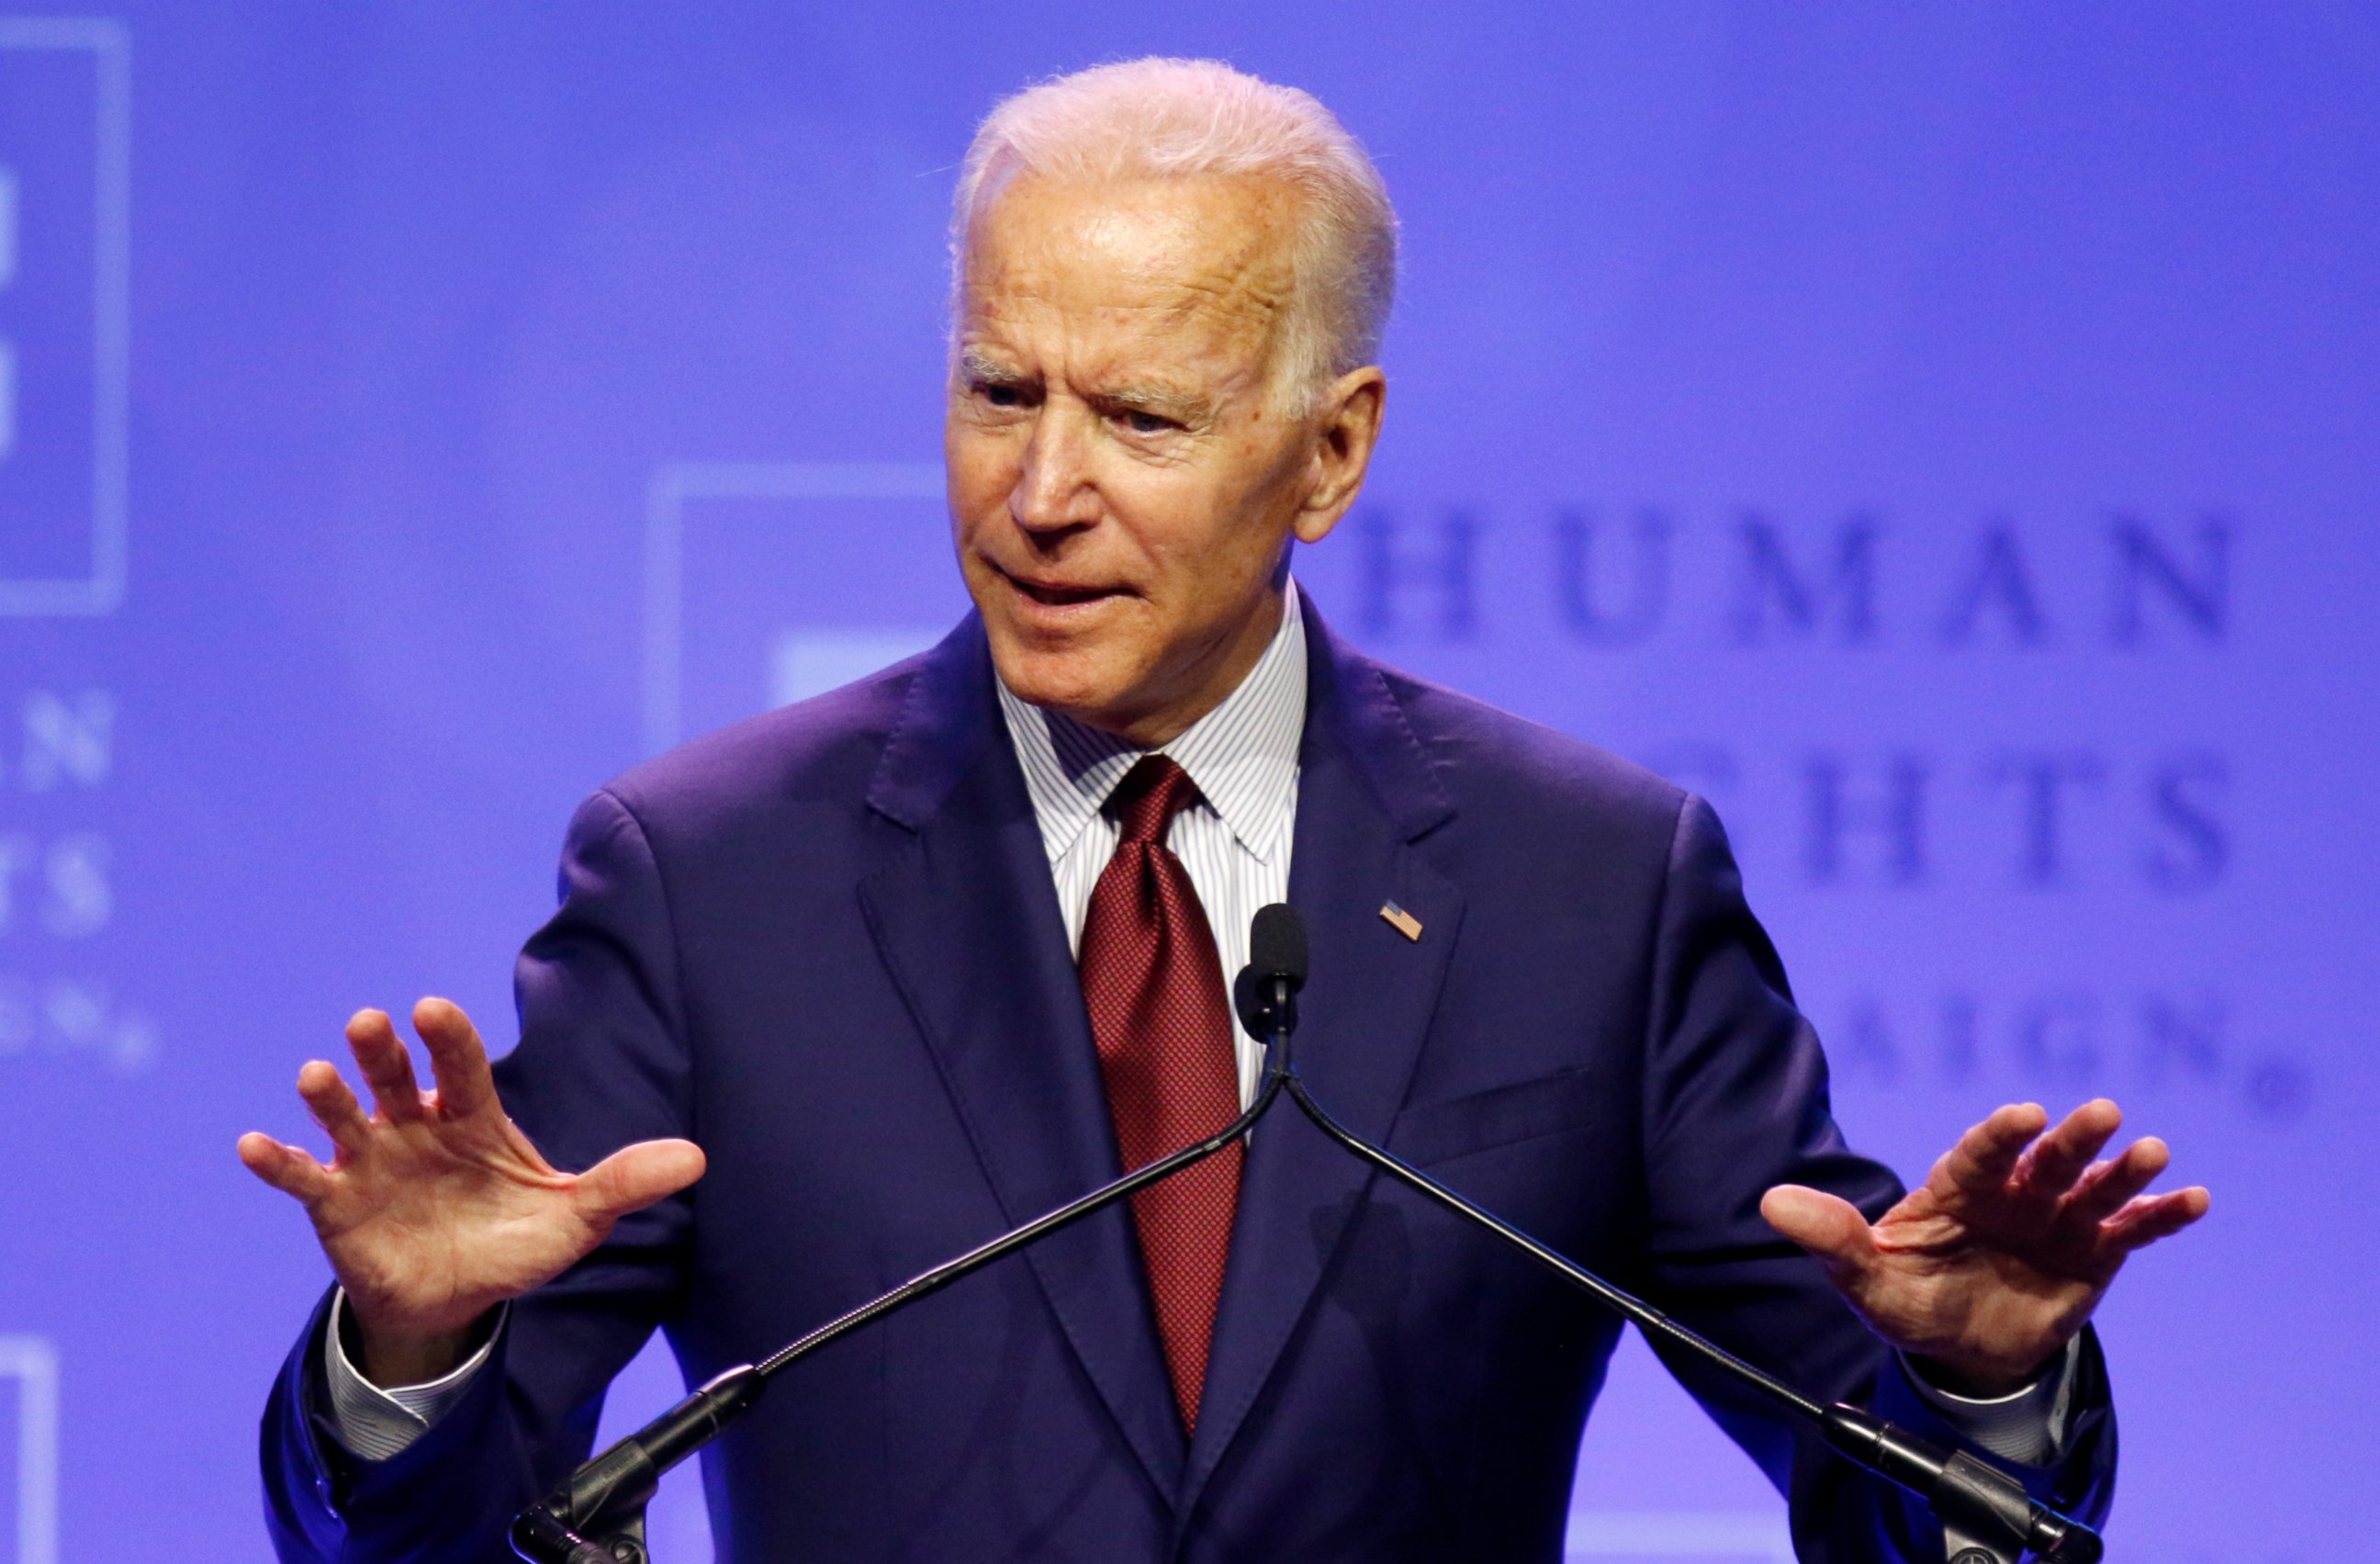 PHOTO: Democratic presidential candidate, former Vice President Joe Biden speaks during the Human Rights Campaign Columbus, Ohio Dinner at Ohio State University Saturday, June 1, 2019.